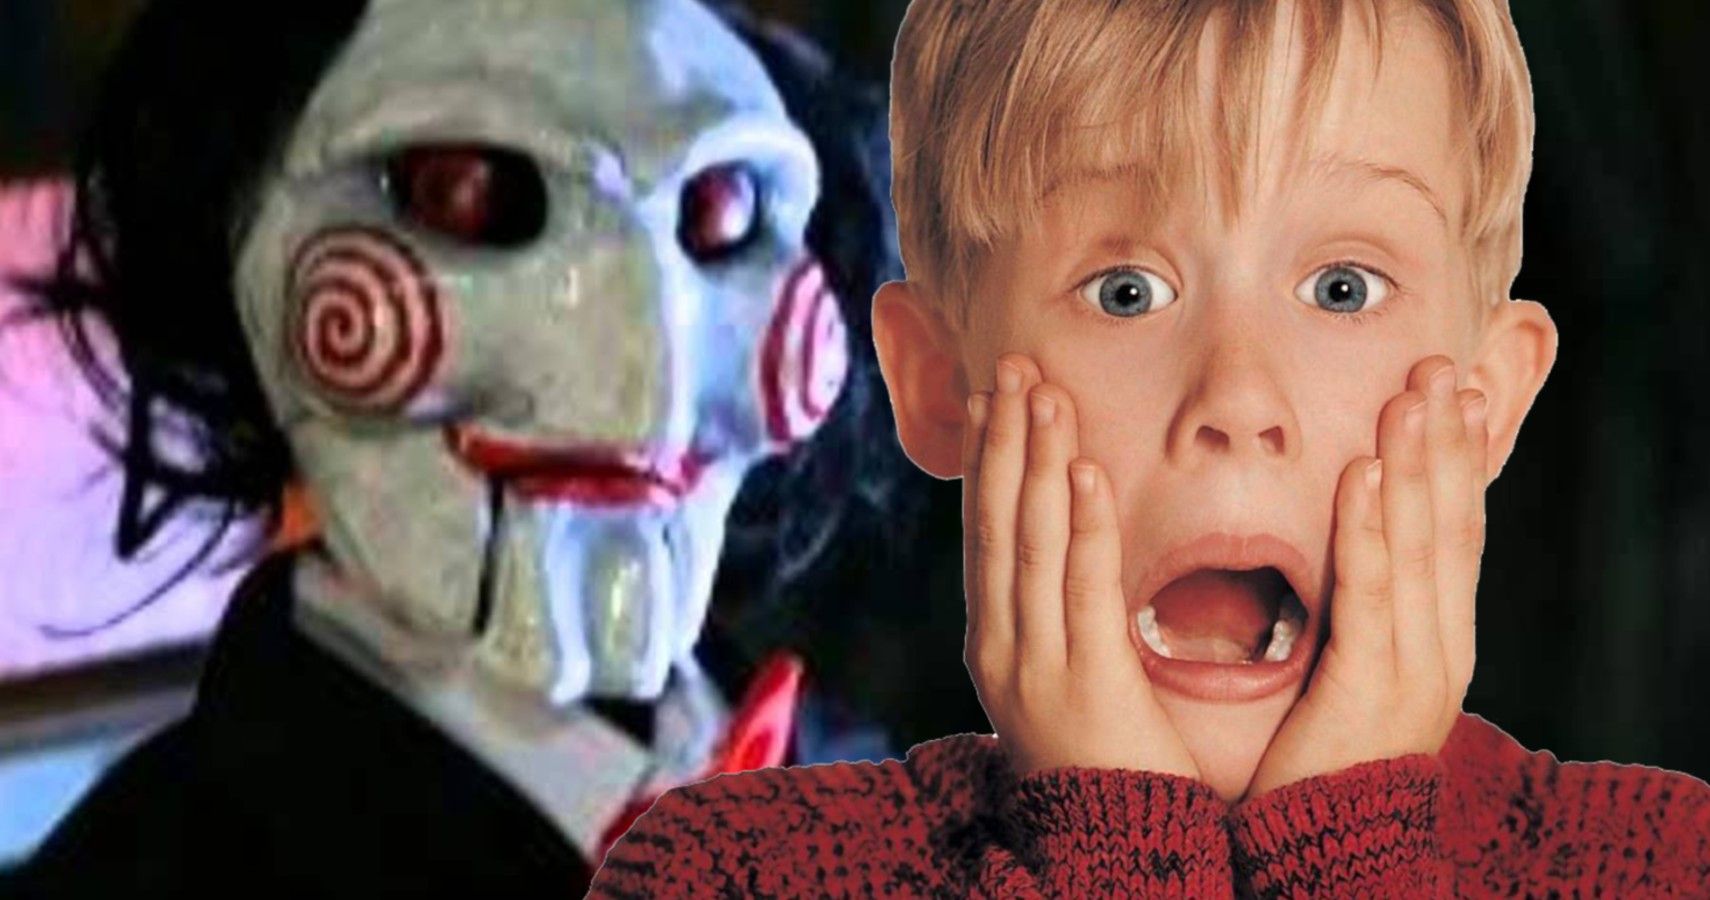 Home Alone Vs Saw 5 Ways Kevin Would Win Against Jigsaw (& 5 Jigsaw Wins)